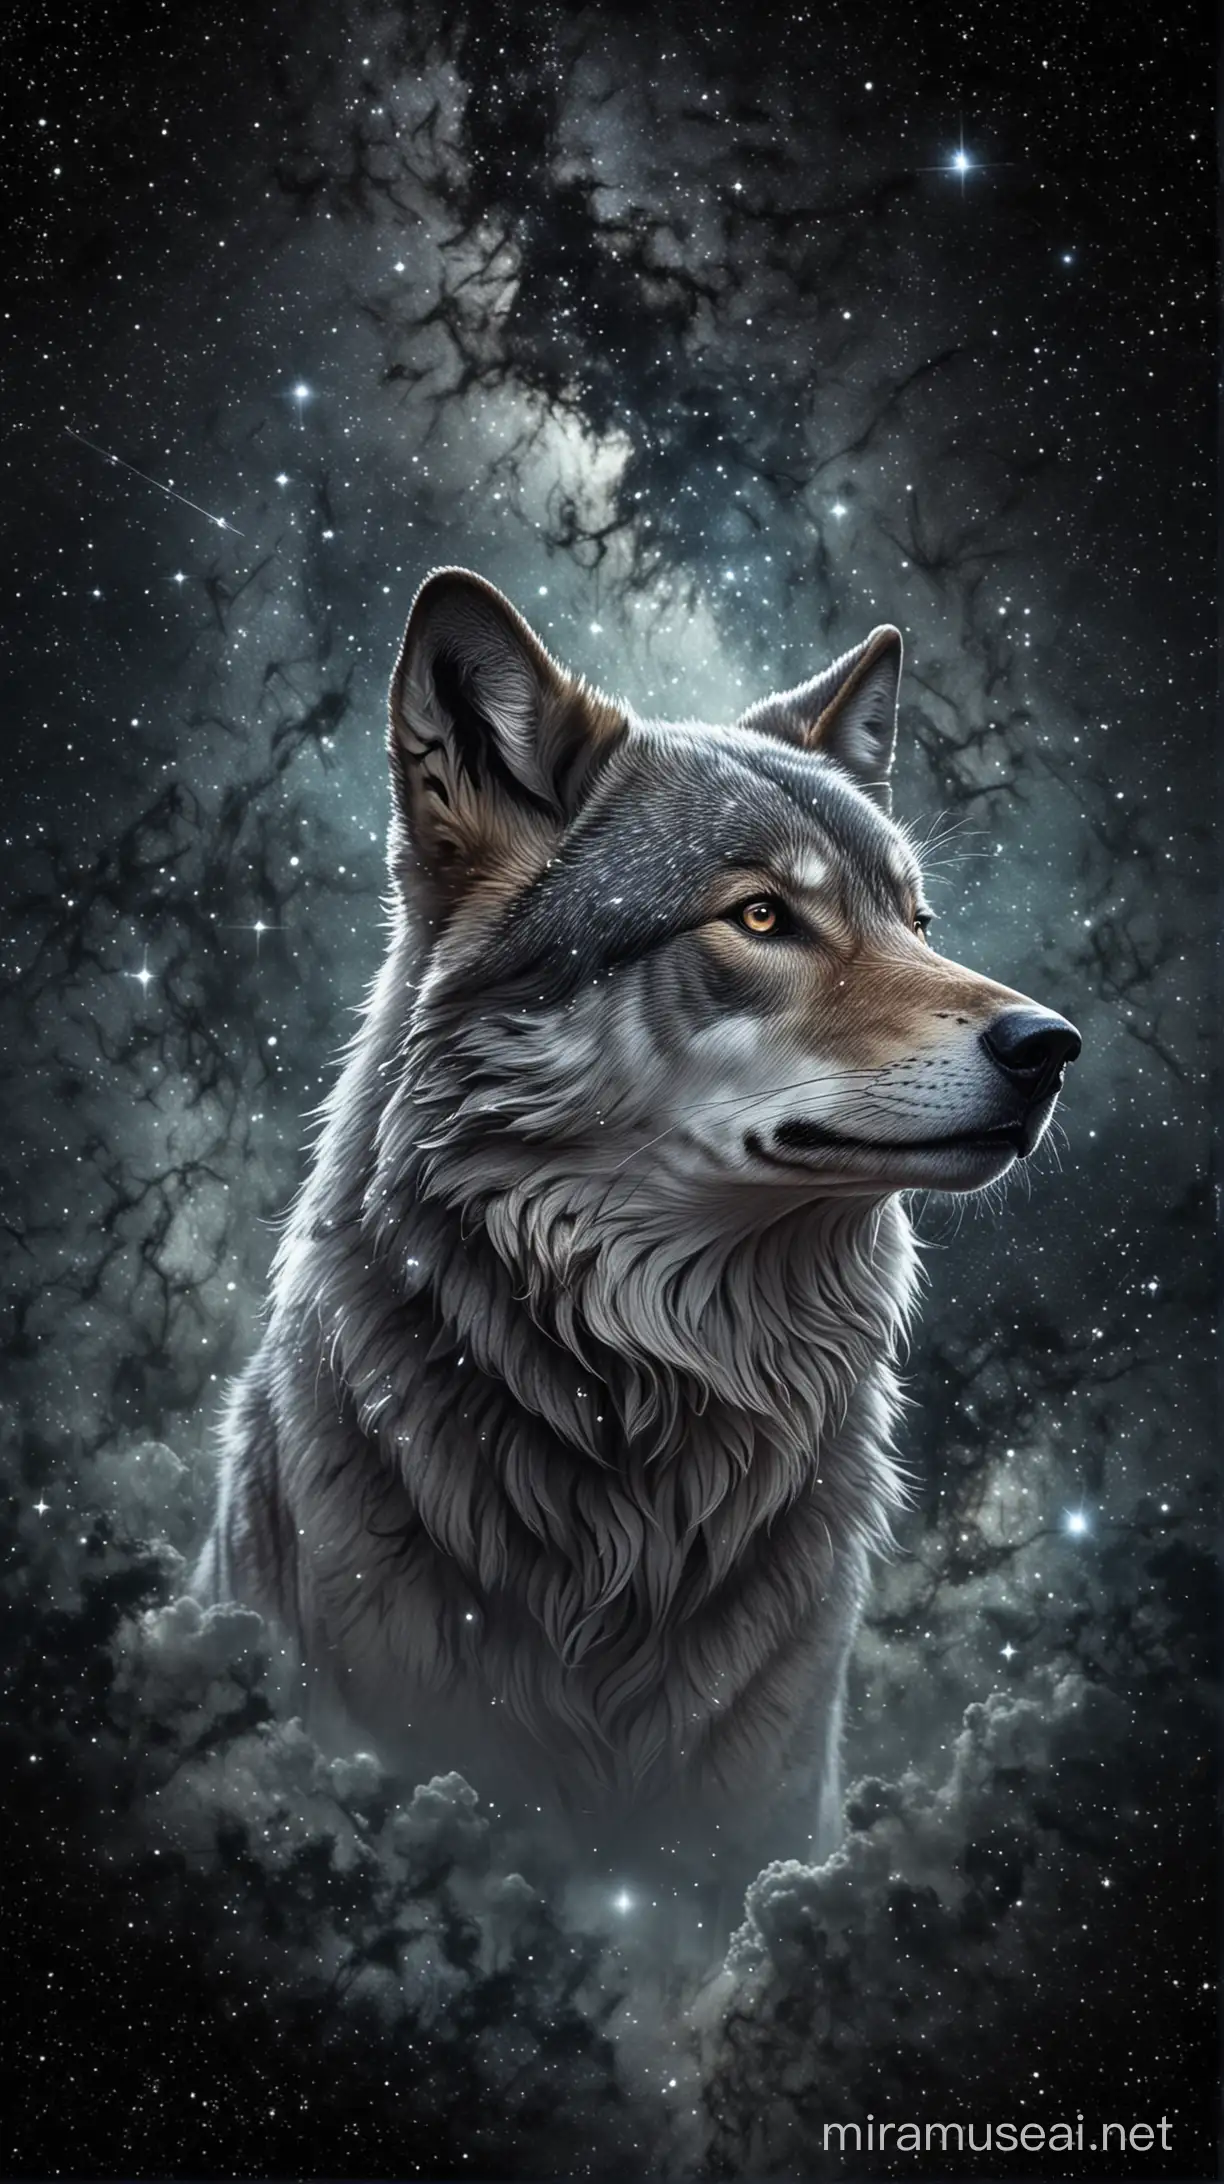 Celestial Constellation of the Wolf in the Sky